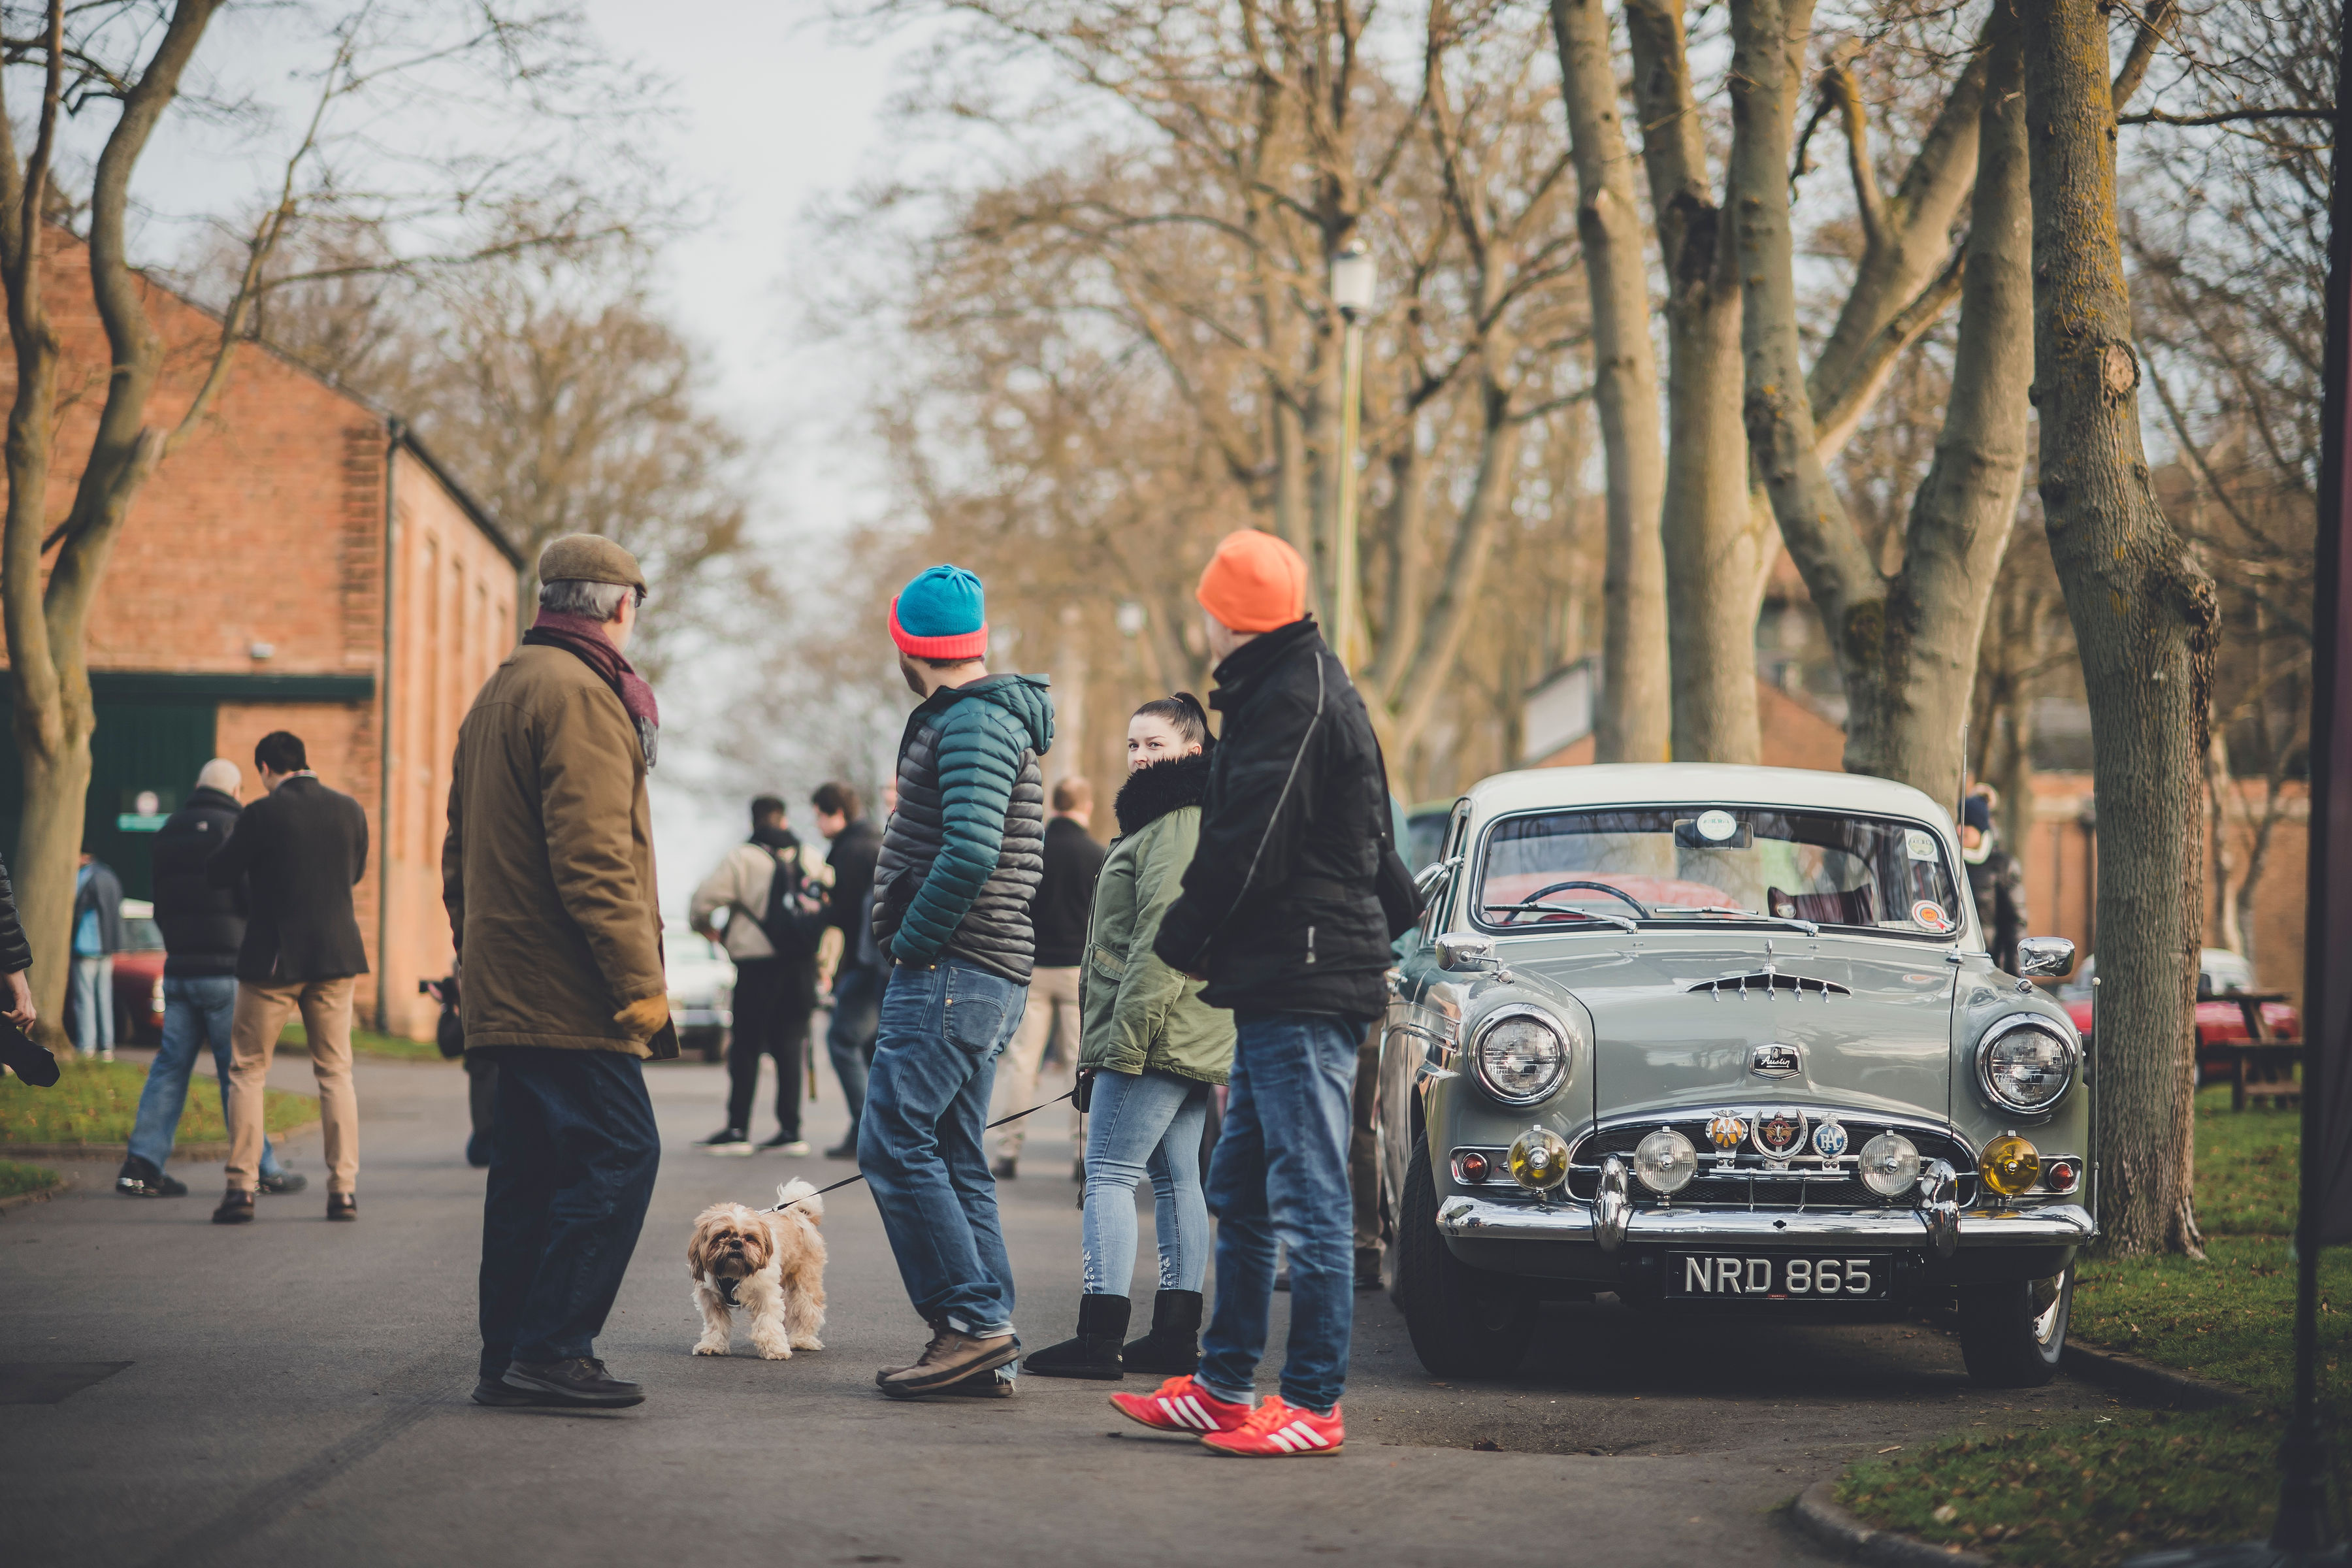 Museums, Happy new year, indeed! Record turnout at Bicester Heritage, ClassicCars.com Journal